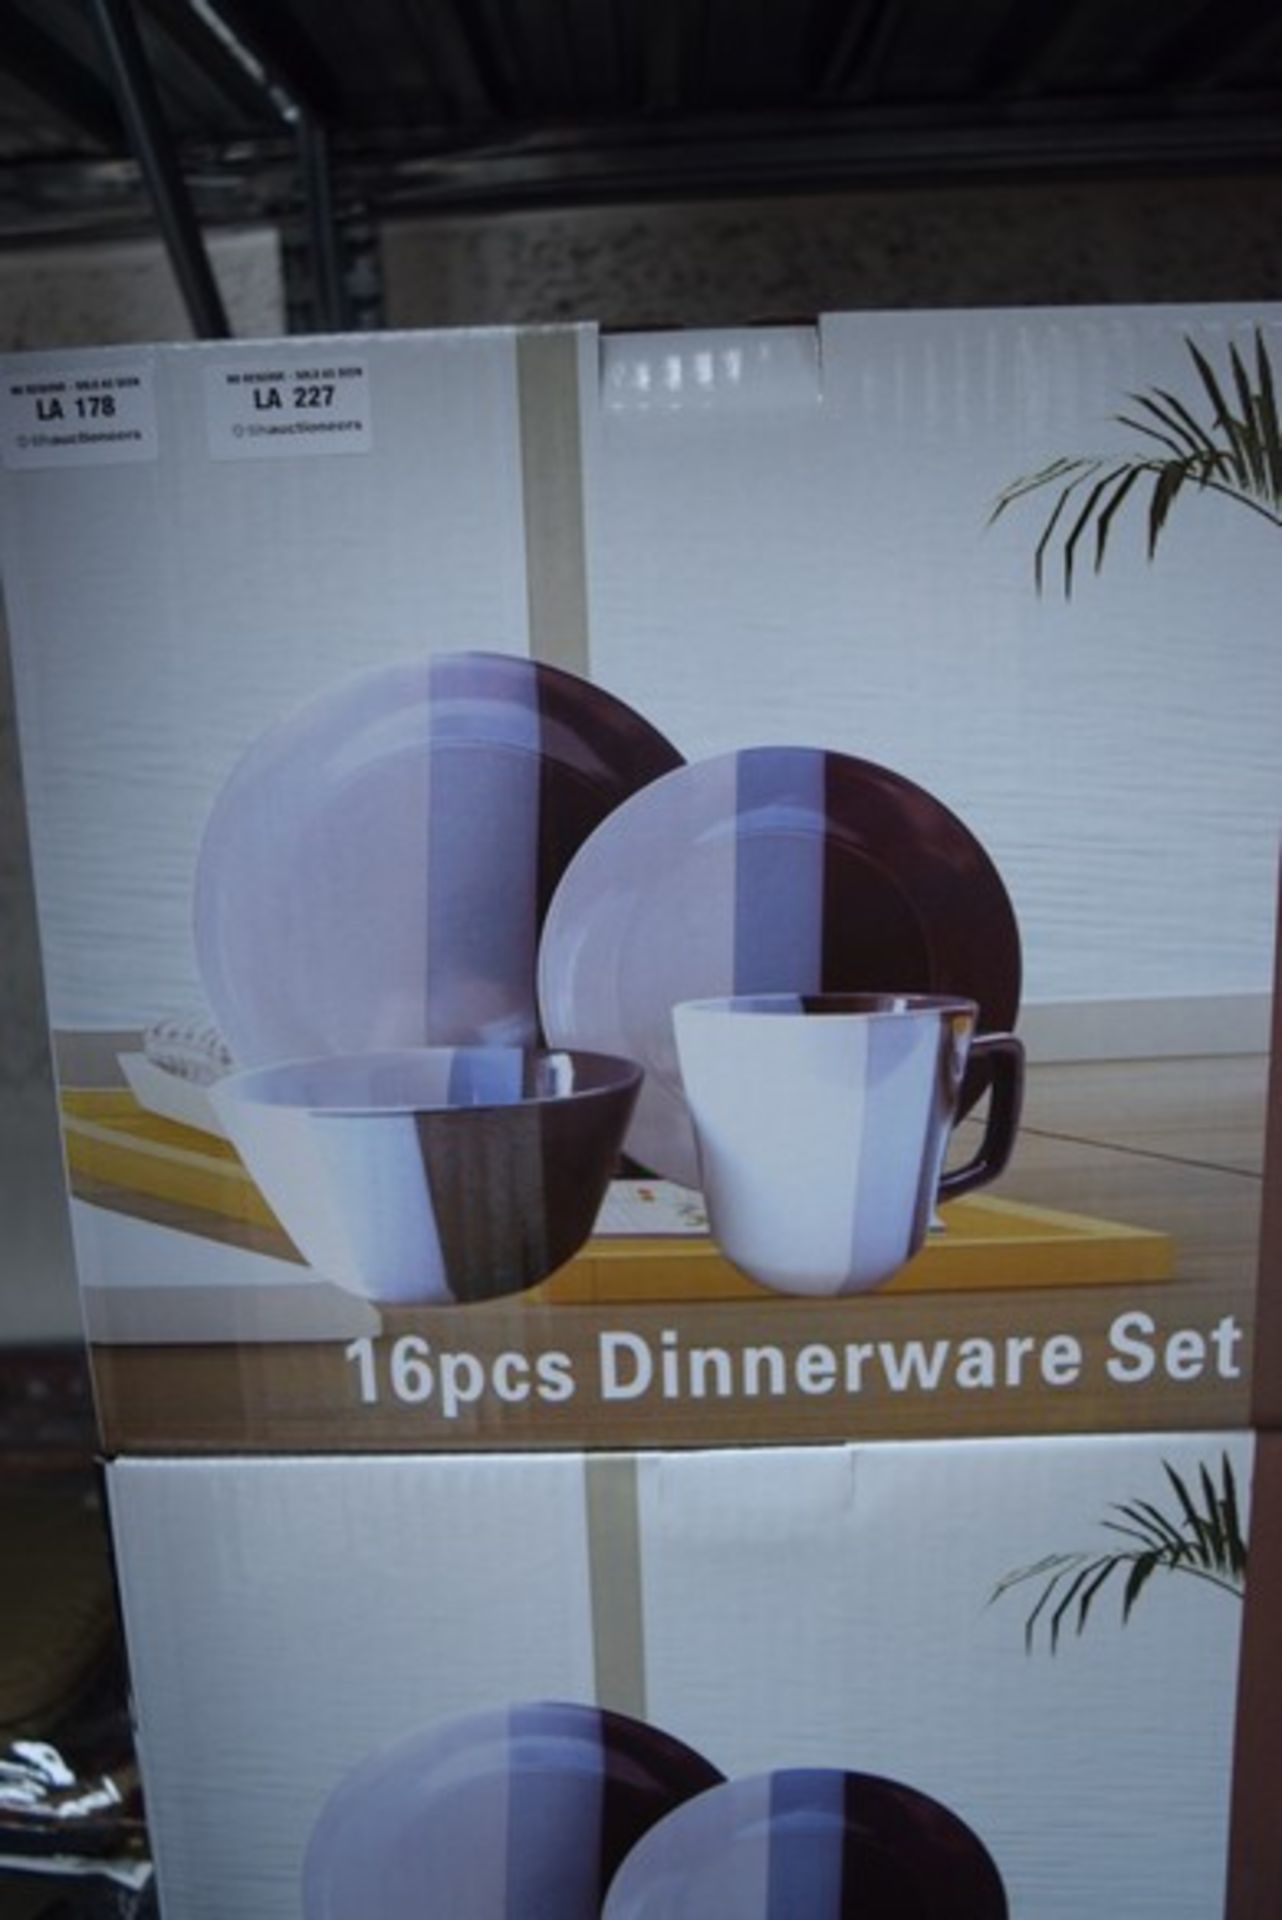 1 x BOXED ROOM ESSENTIALS 16 PIECE DINNER WARE SET TO INCLUDE 4 X 10.5" DINNER PLATES, 4 X 8" SIDE